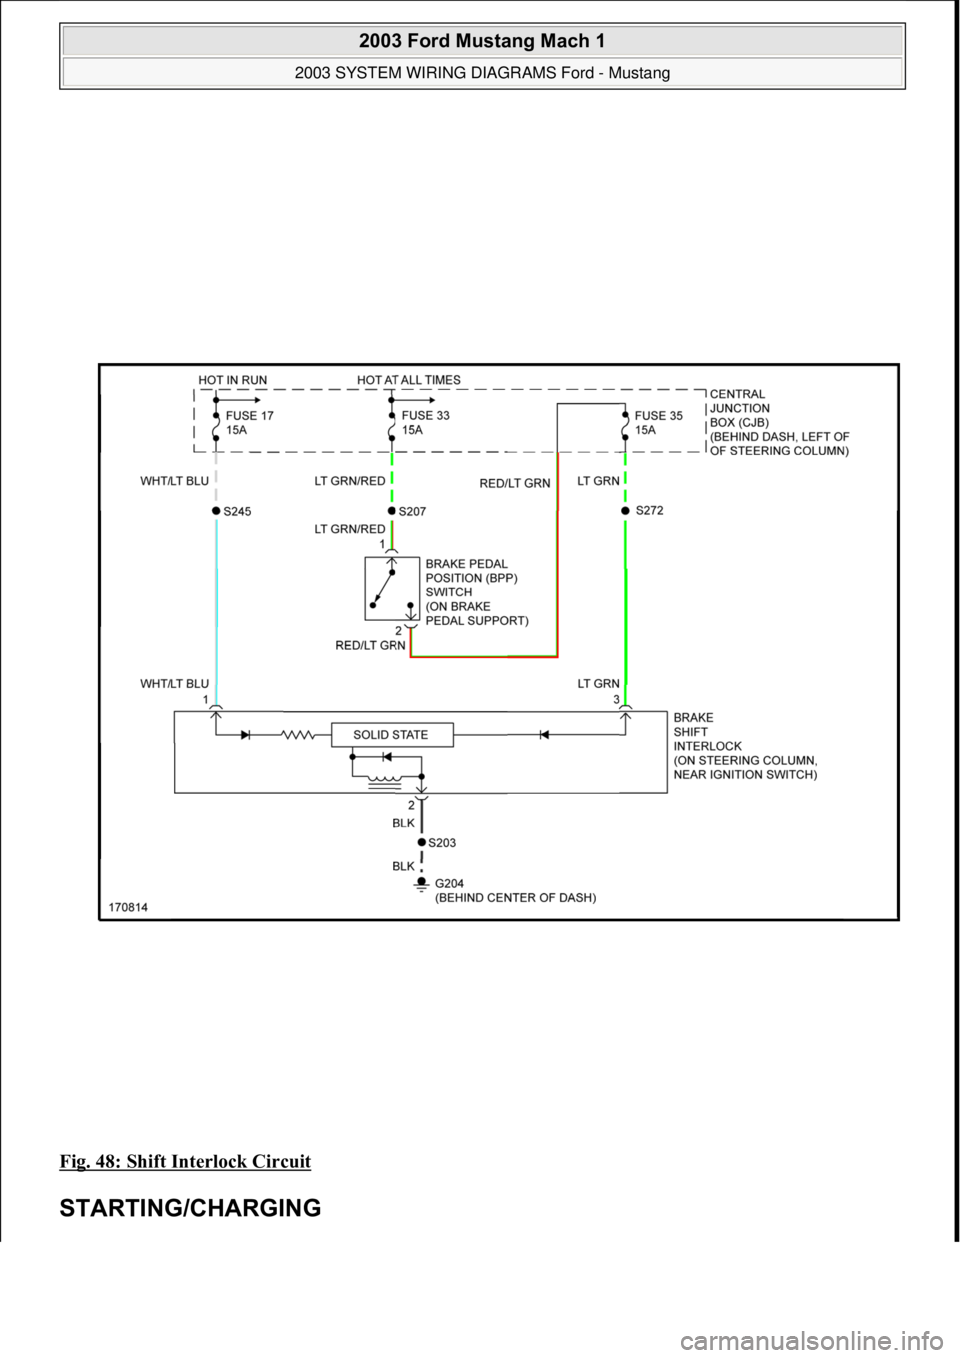 FORD MUSTANG 2003  Workshop Manual Fig. 48: Shift Interlock Circuit 
STARTING/CHARGING 
 
2003 Ford Mustang Mach 1 
2003 SYSTEM WIRING DIAGRAMS Ford - Mustang  
111  
18 ноября  2011 г. 12:54:33Page 49 © 2006 Mitchell Repair In